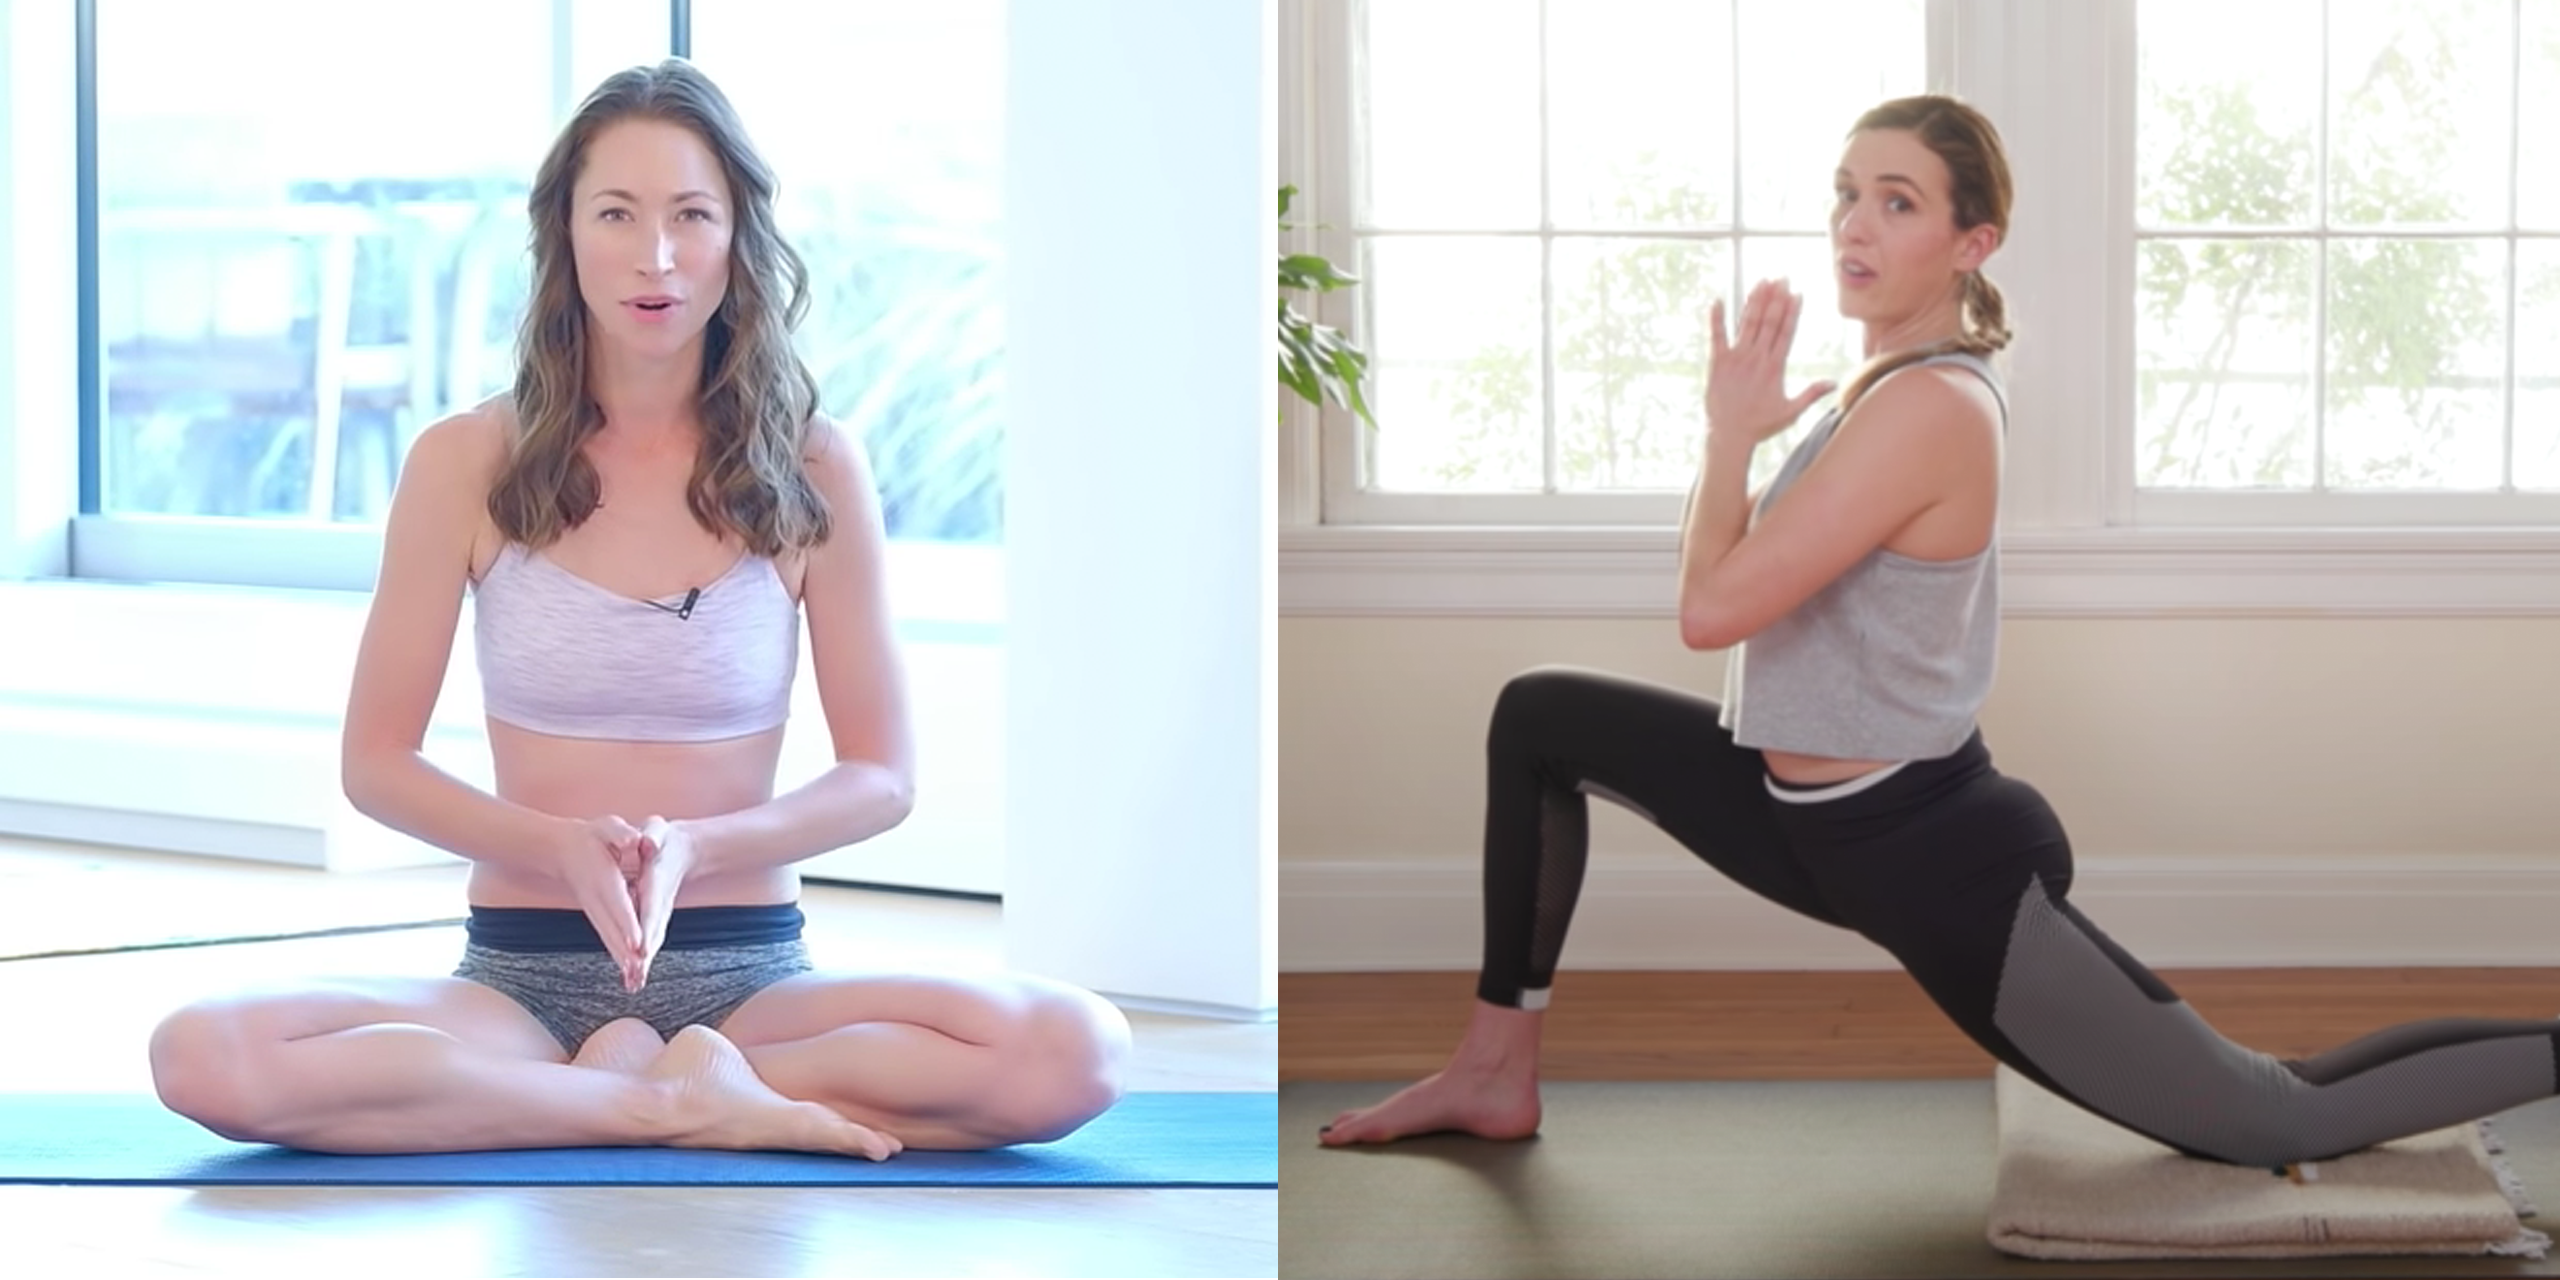 10 Best Yoga Videos on YouTube for 2022 - Yoga Workouts on YouTube